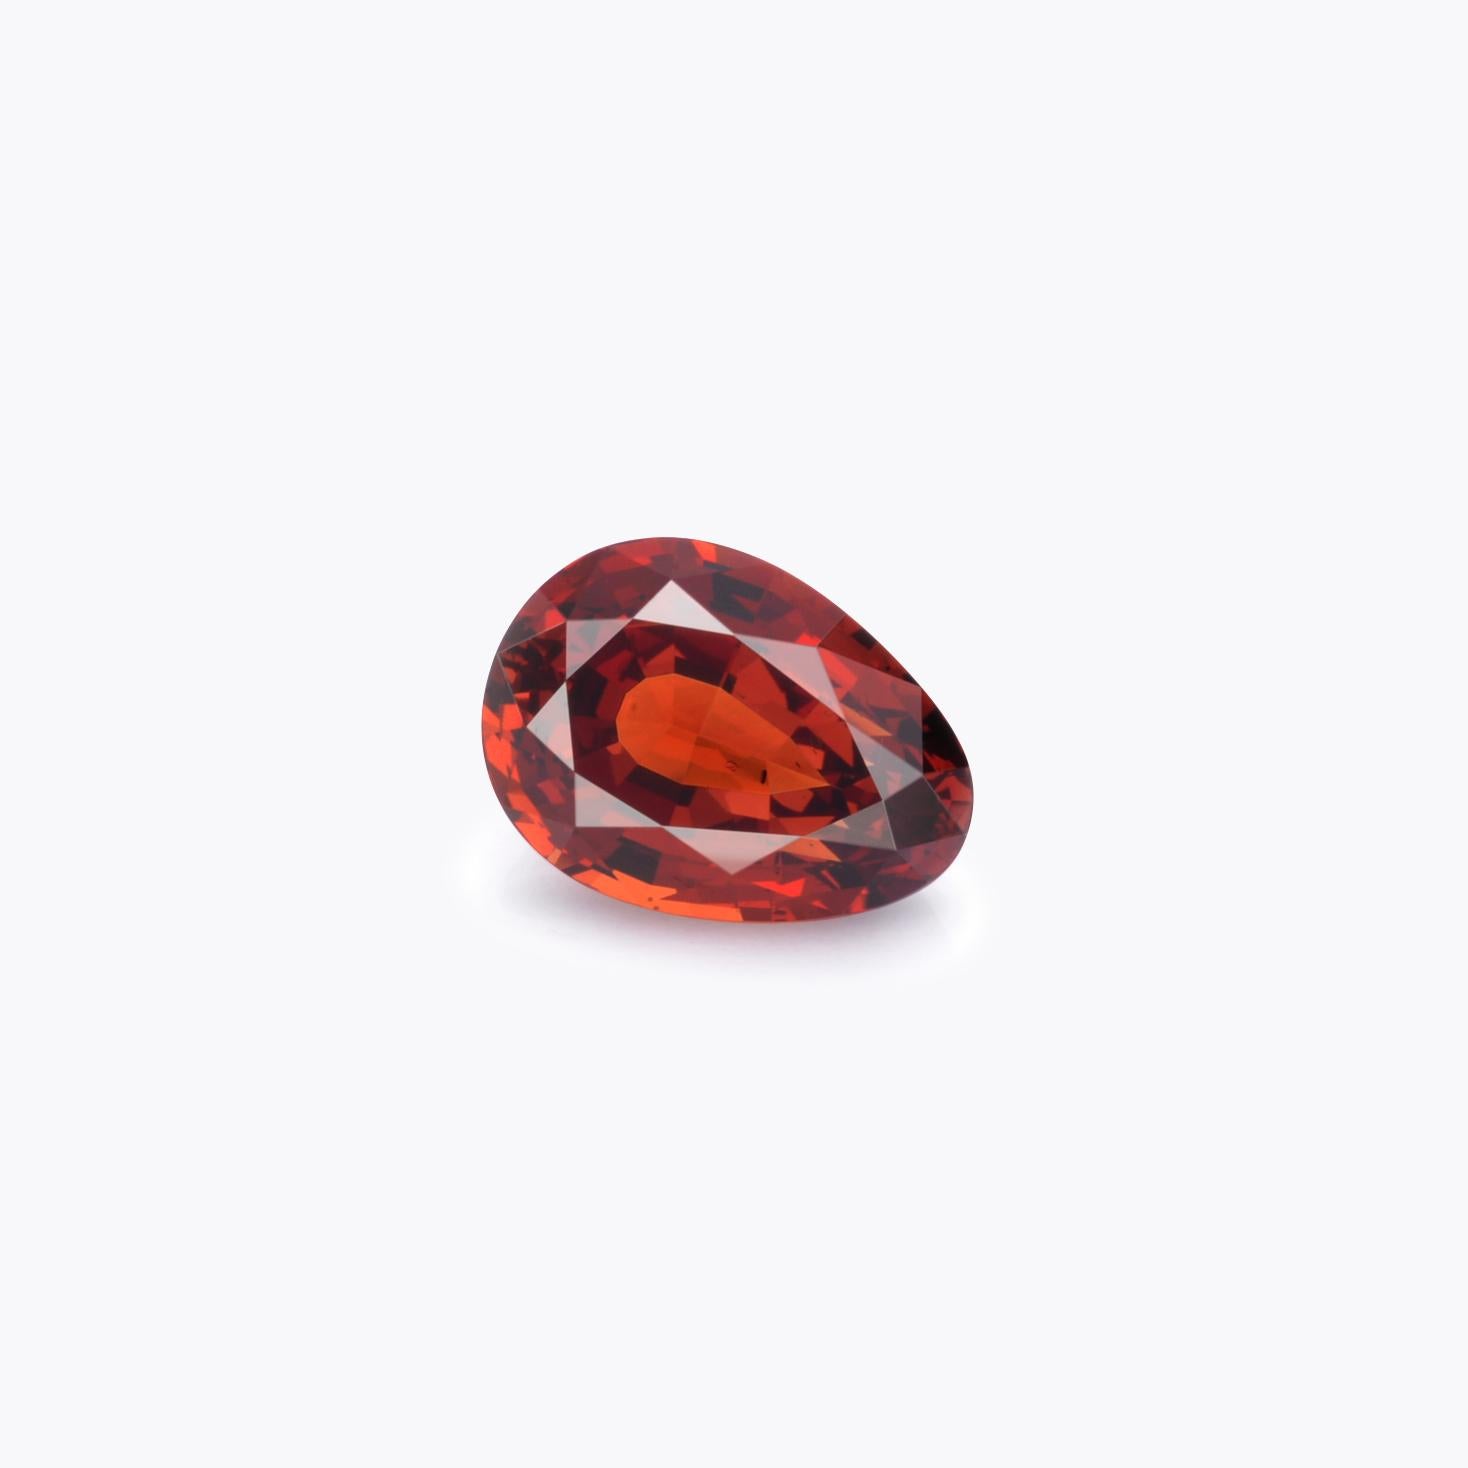 Contemporary Spessartite Garnet Ring Loose Stone 6.74 Carat Unmounted Pear Shape For Sale